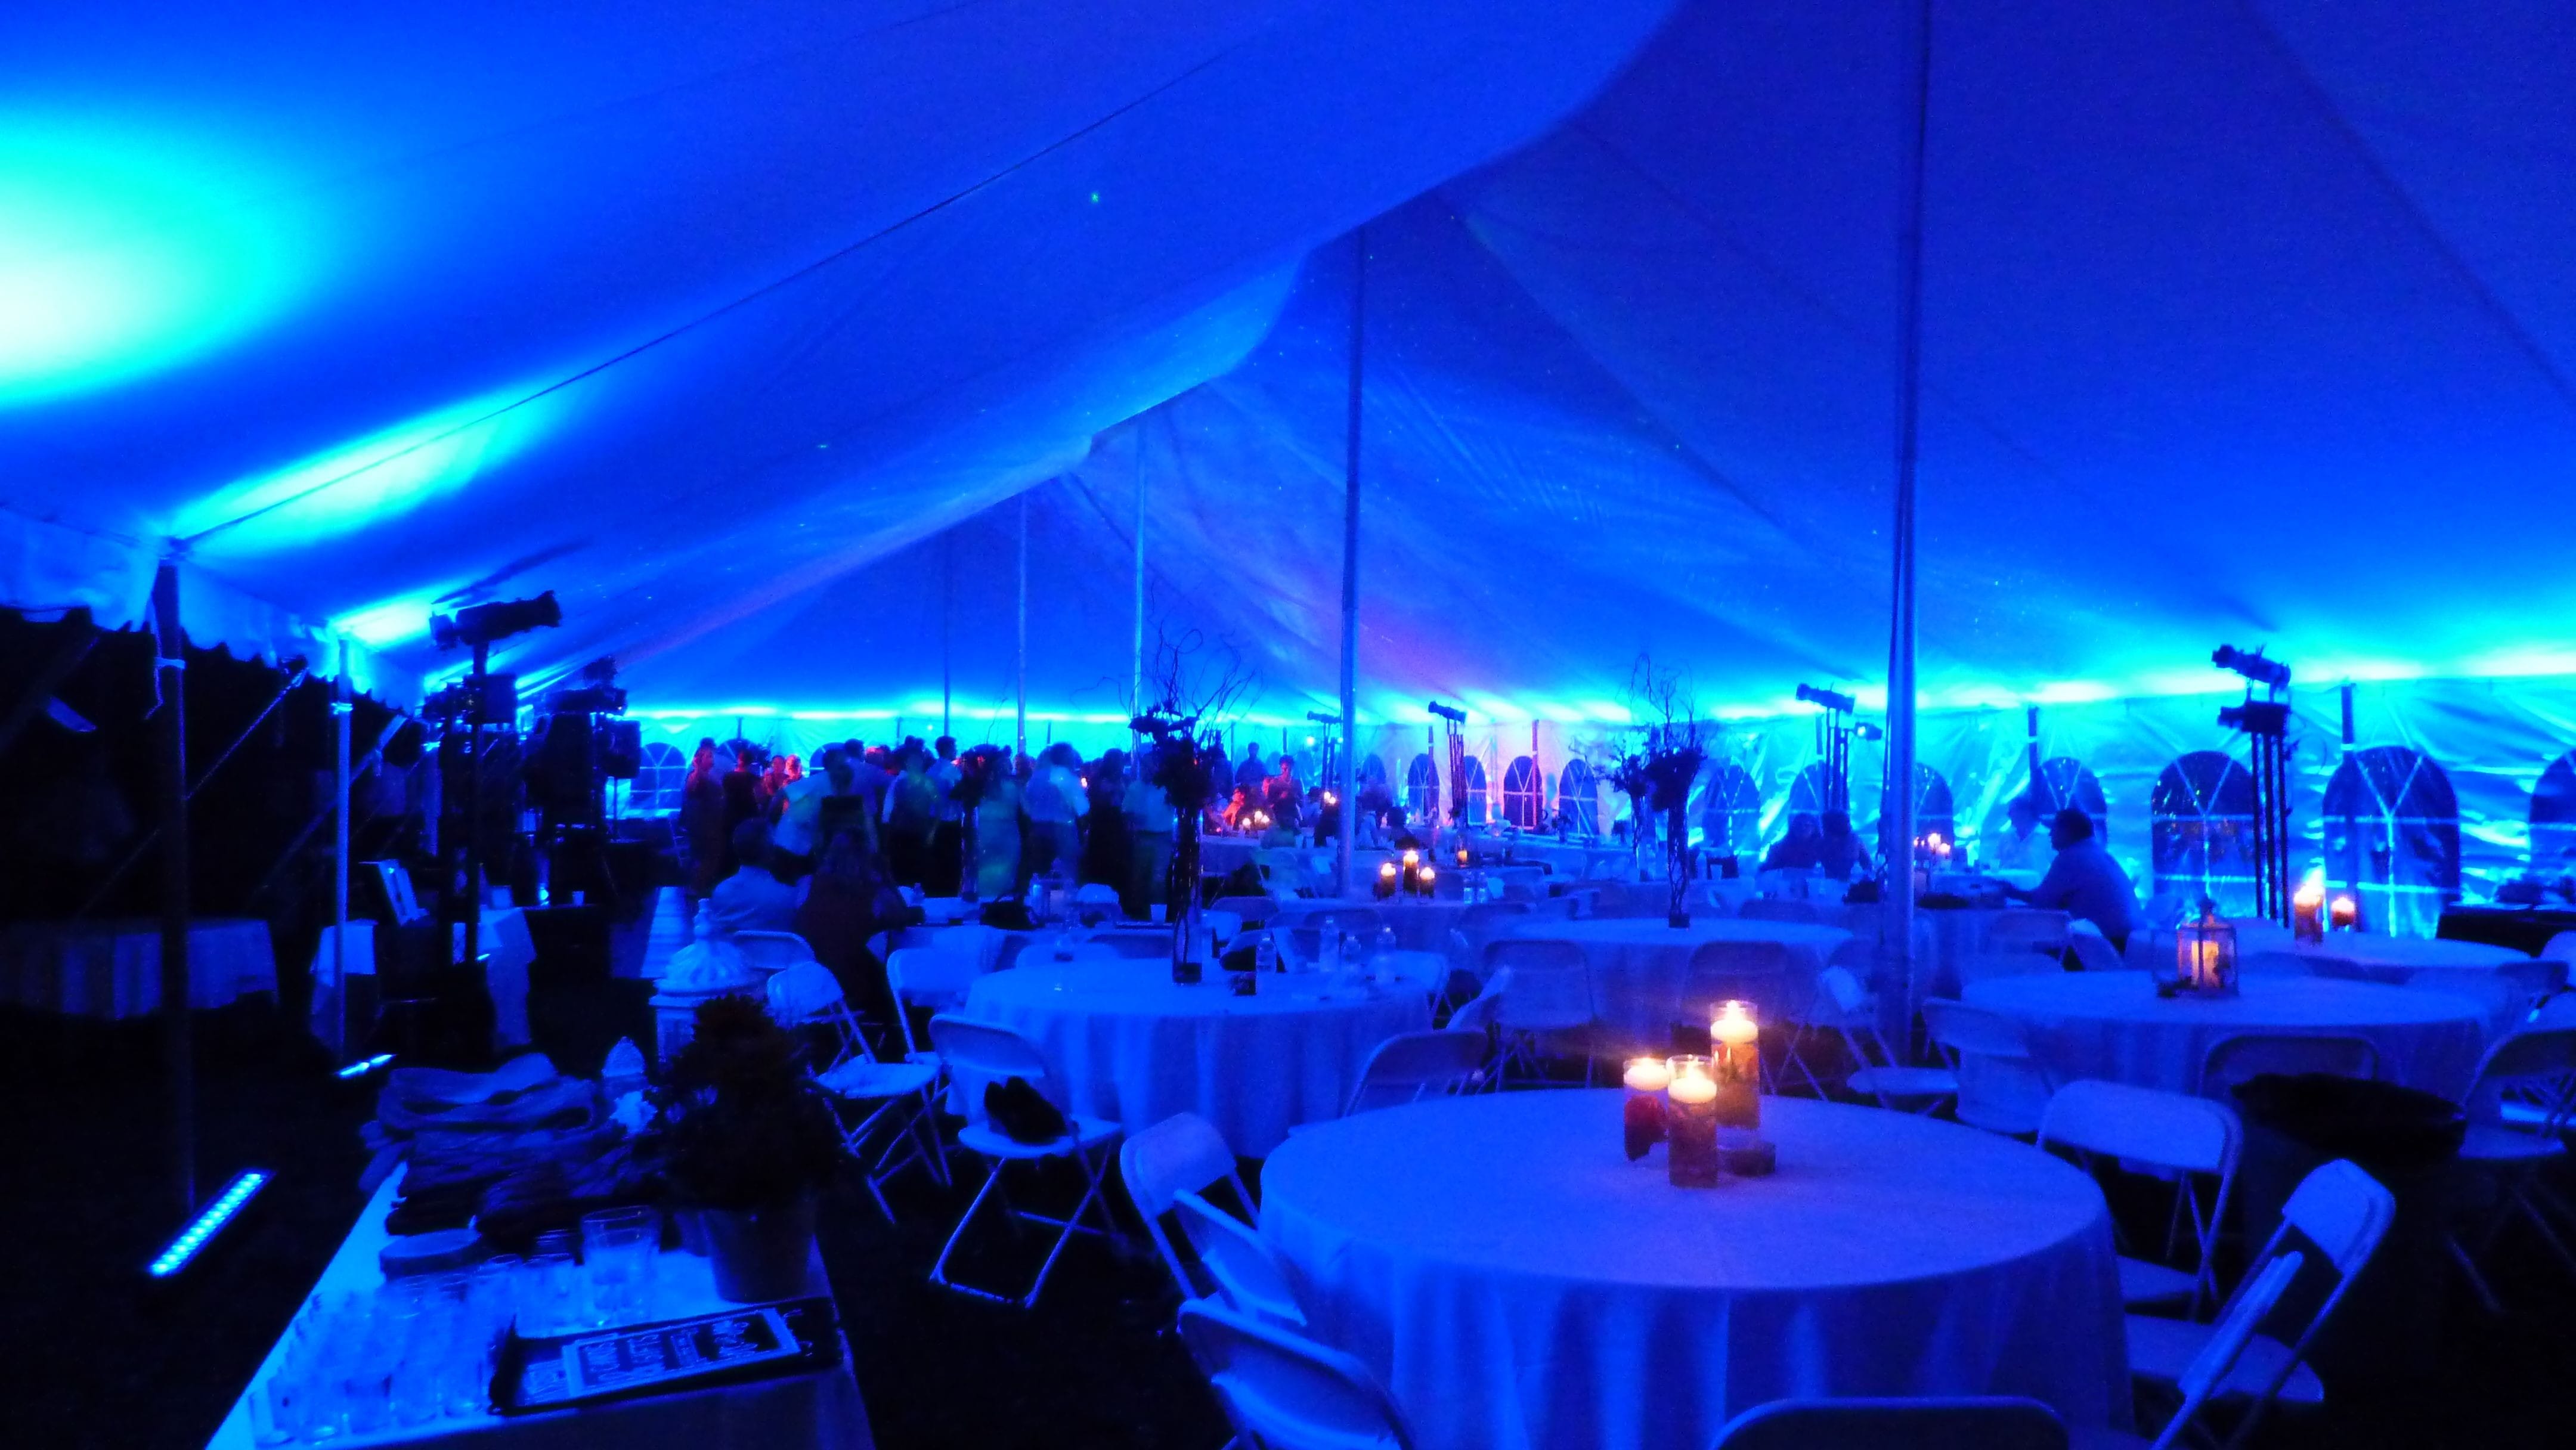 Tent wedding lighting. Up lighting in blue, Stars and Northern Lights on the ceiling.